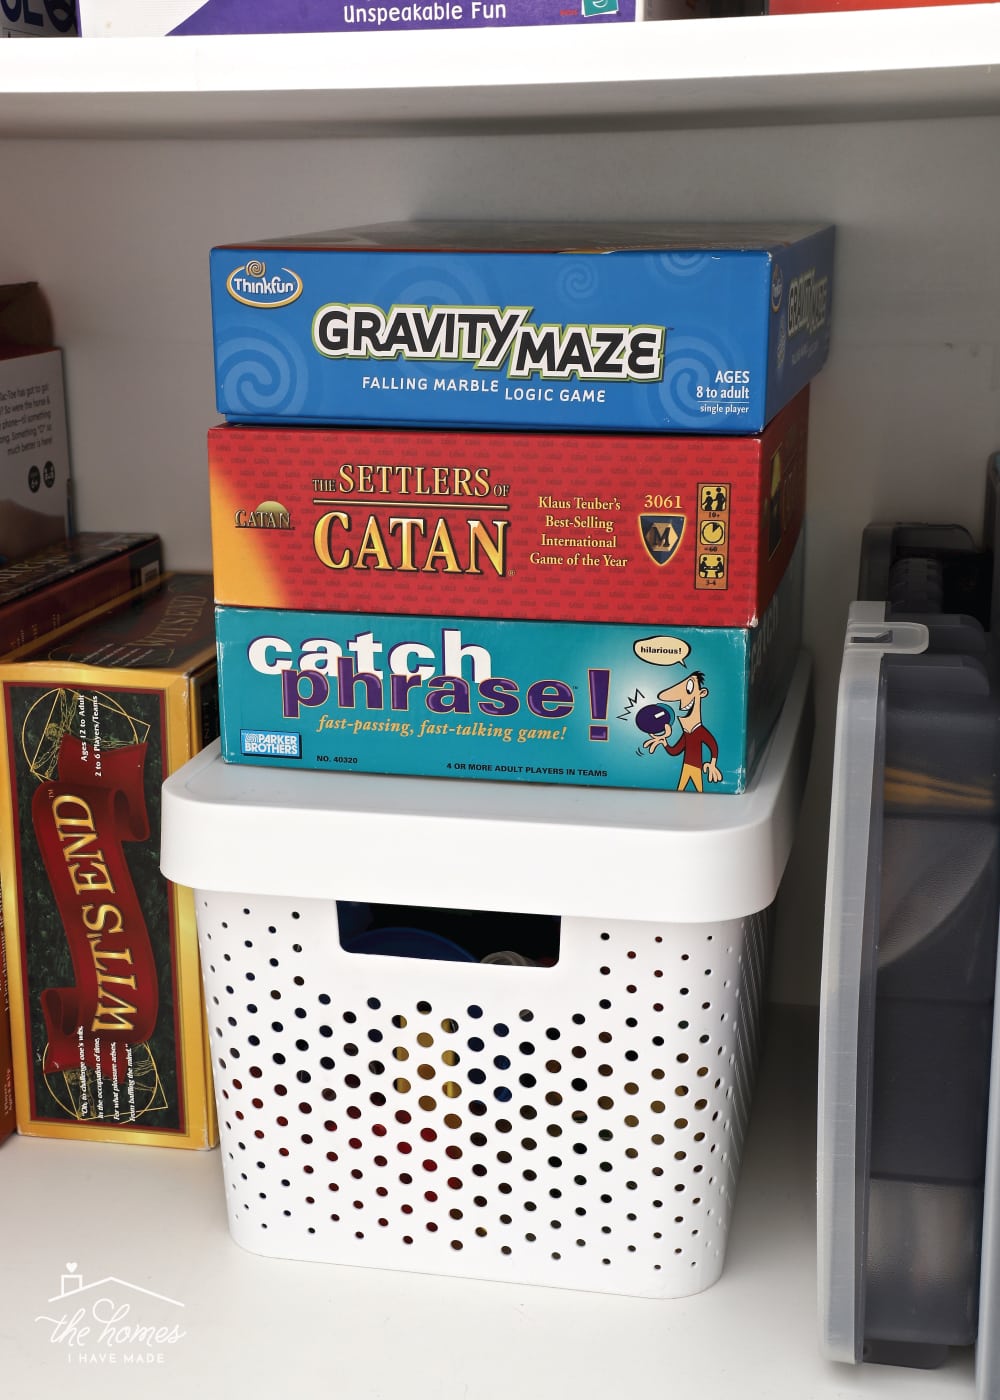 Vertical image of a variety of board games stacked vertically on top of a white storage basket inside a cabinet